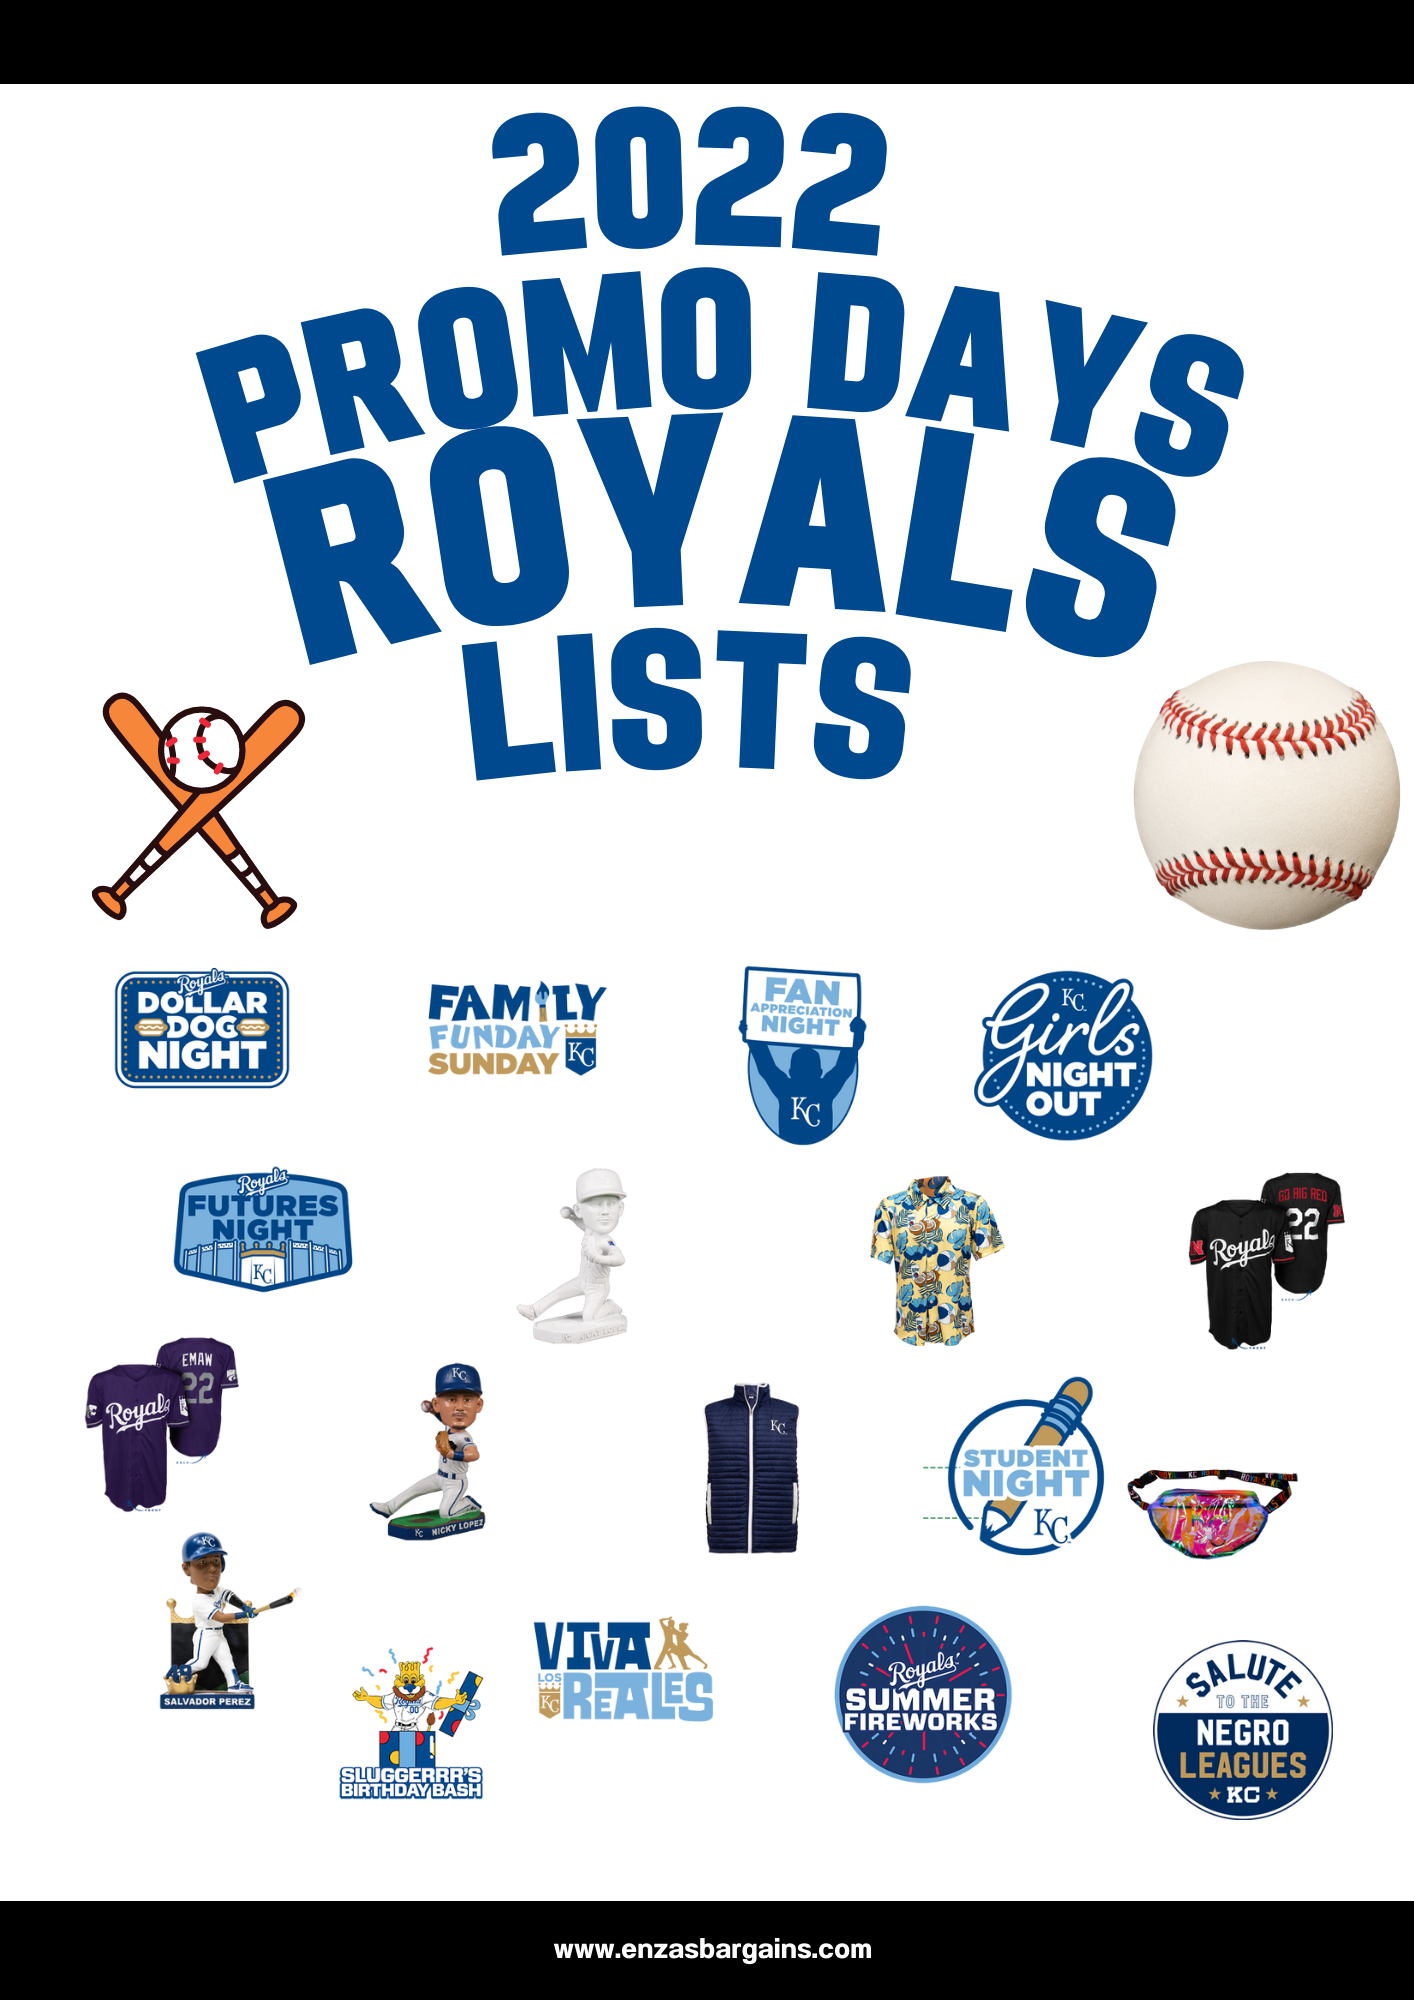 Kansas City Royals Updated 2022 Schedule Magnet, SGA 4/7/22 Opening Day  Giveaway